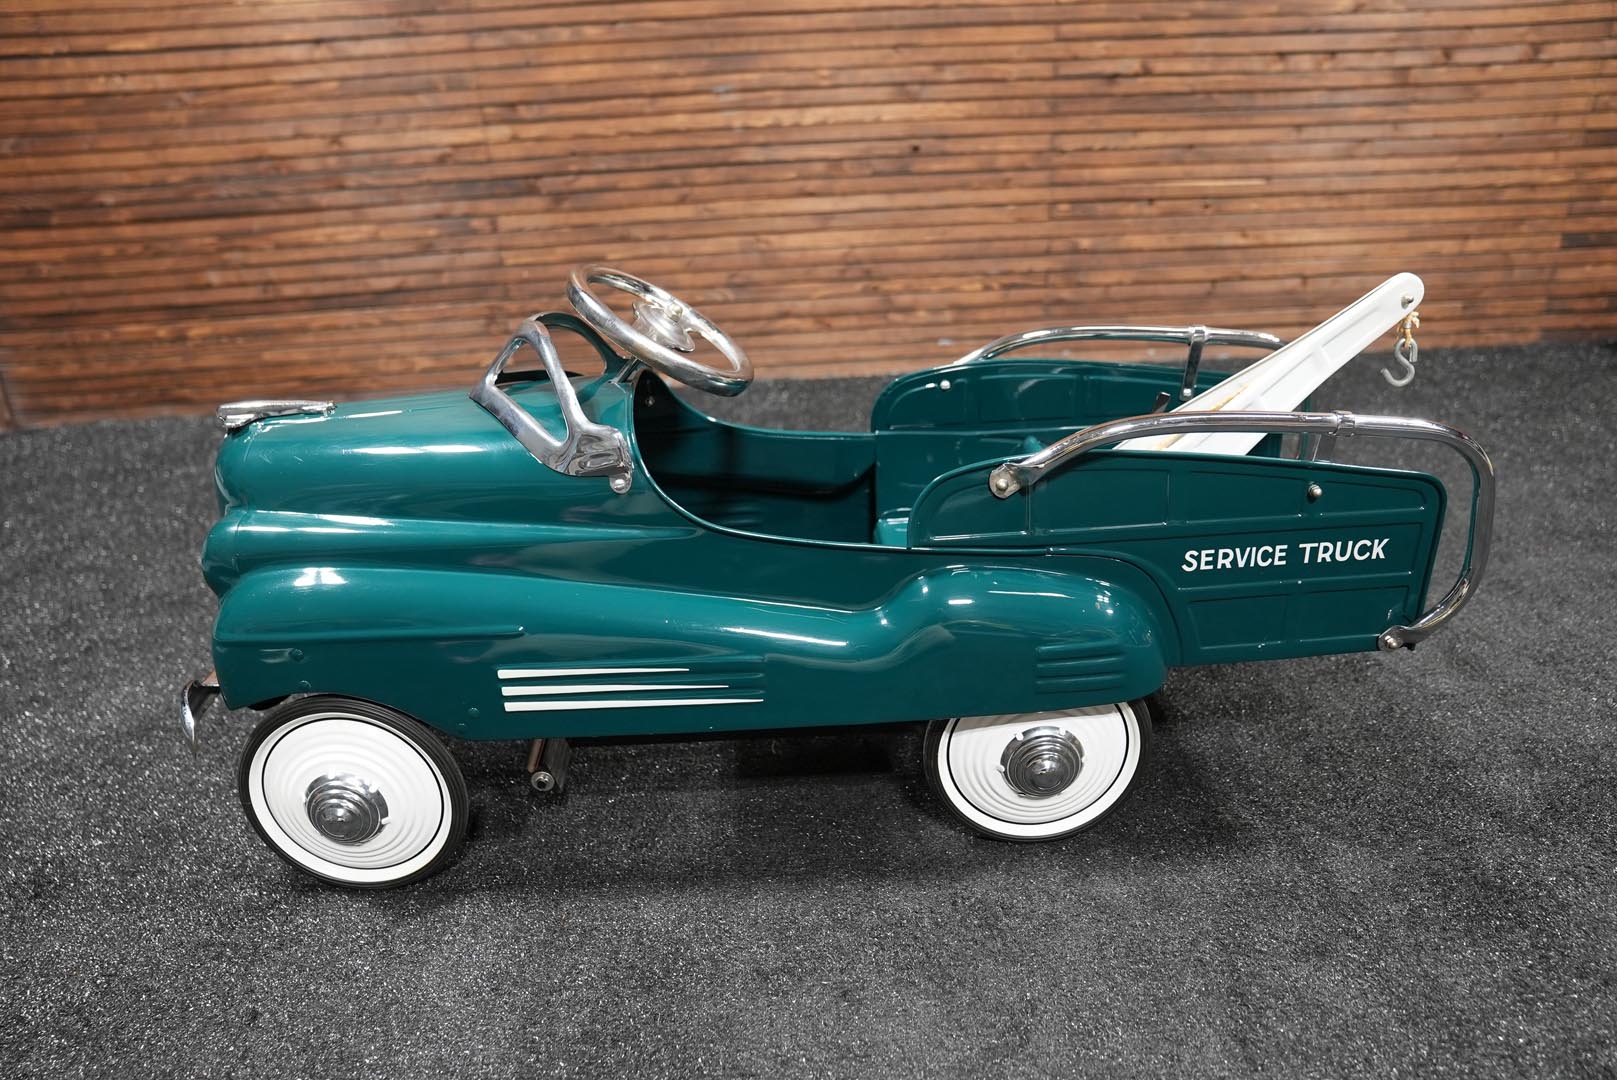 1948 Service Truck Pedal Car by Steelcraft - Restored